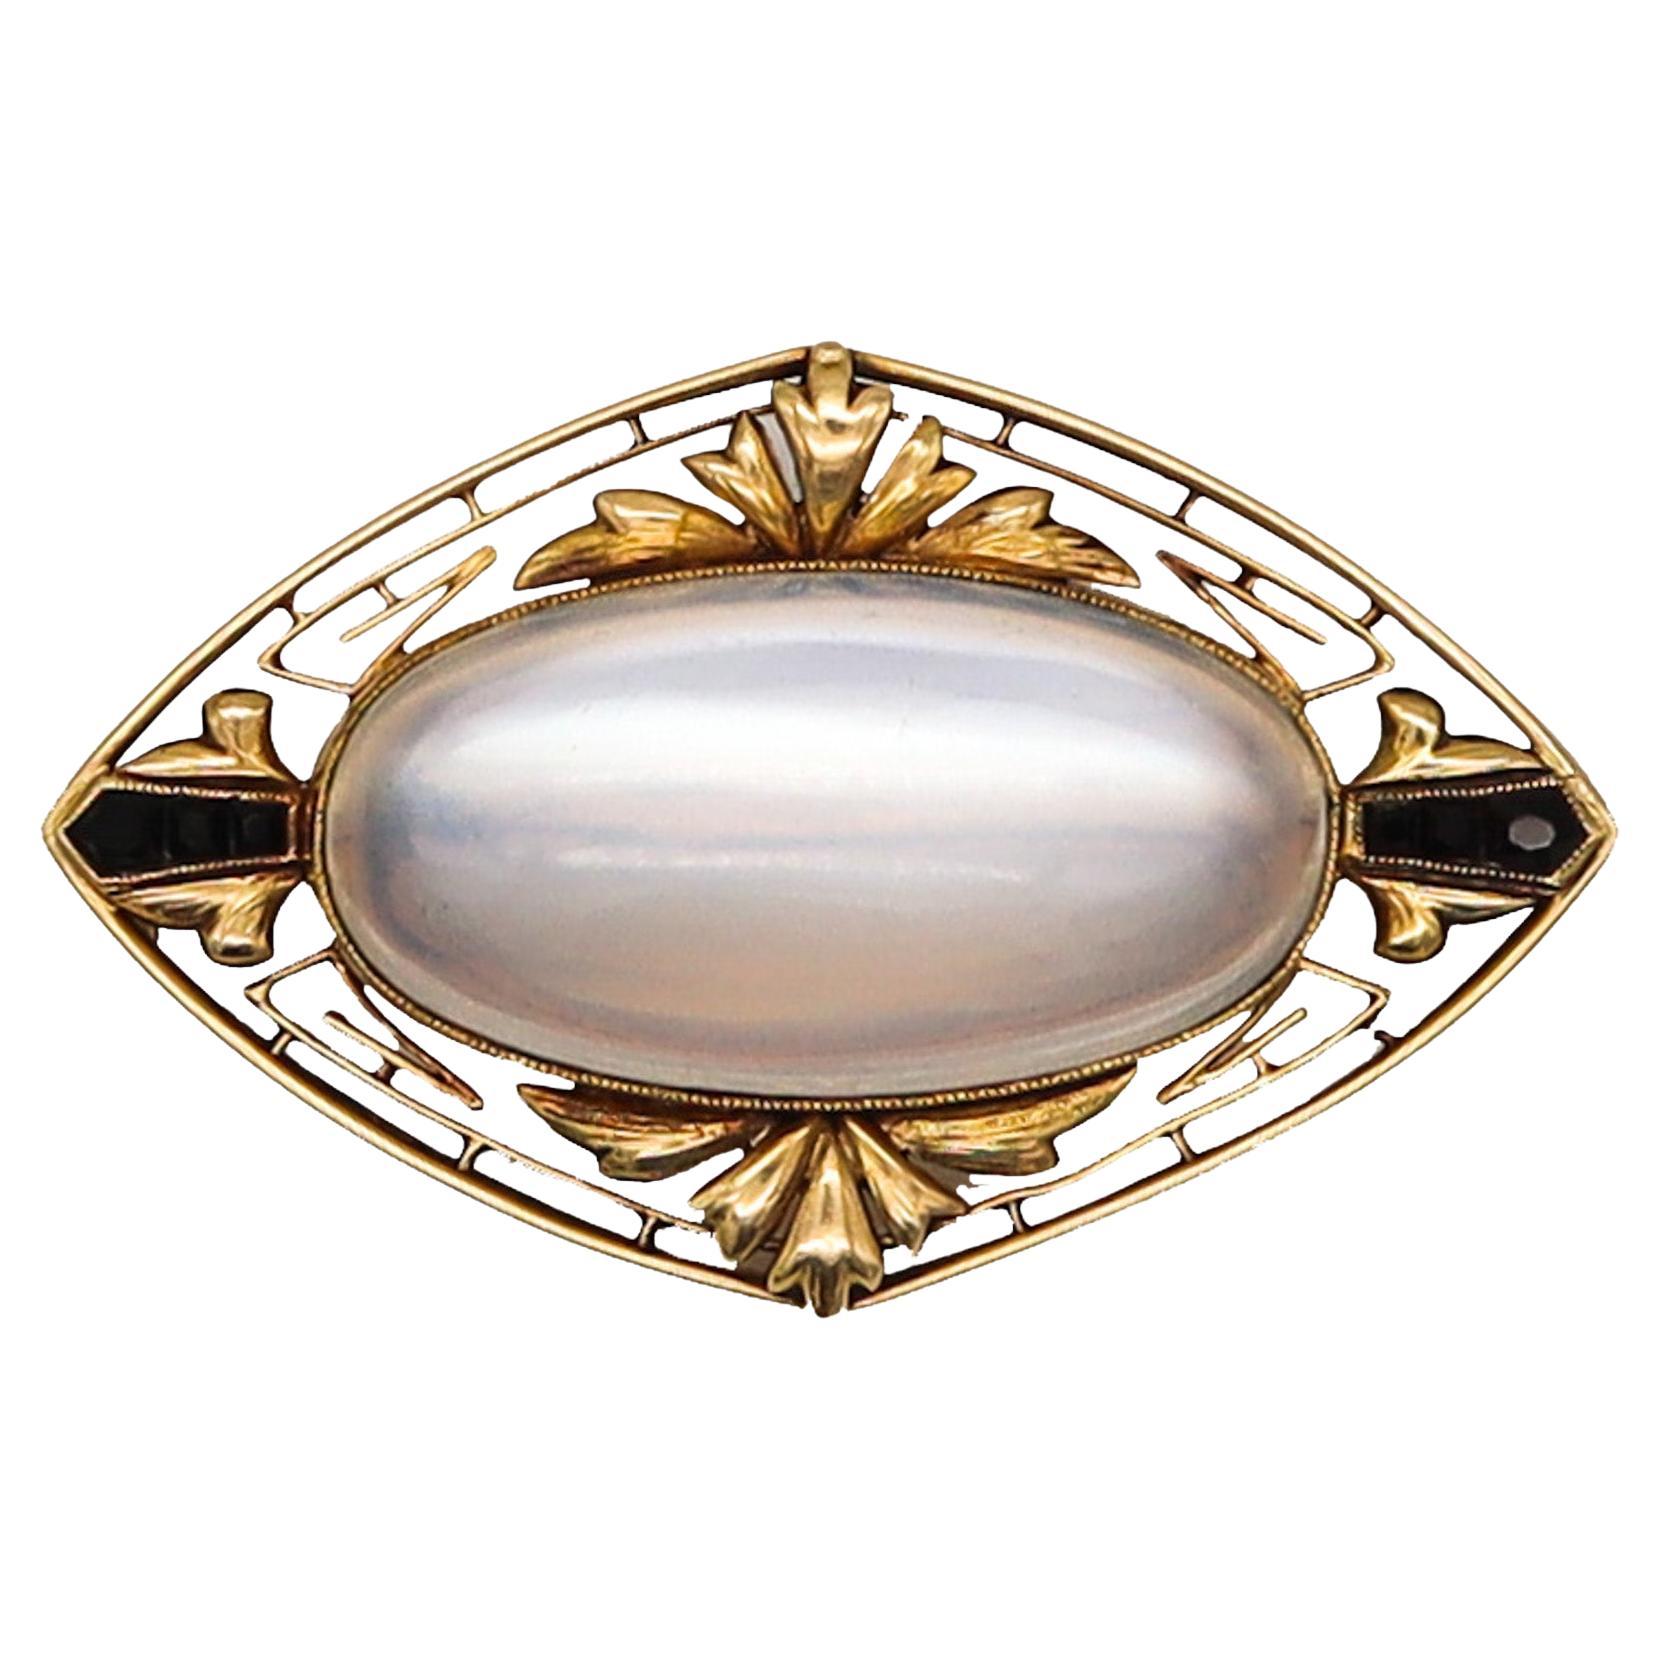 Art deco convertible pendant with moonstone.

A statement beautiful antique piece, created during the art deco period, back in the early 1920's. It was carefully designed with a hint of art nouveau organic patterns and with art deco geometrical